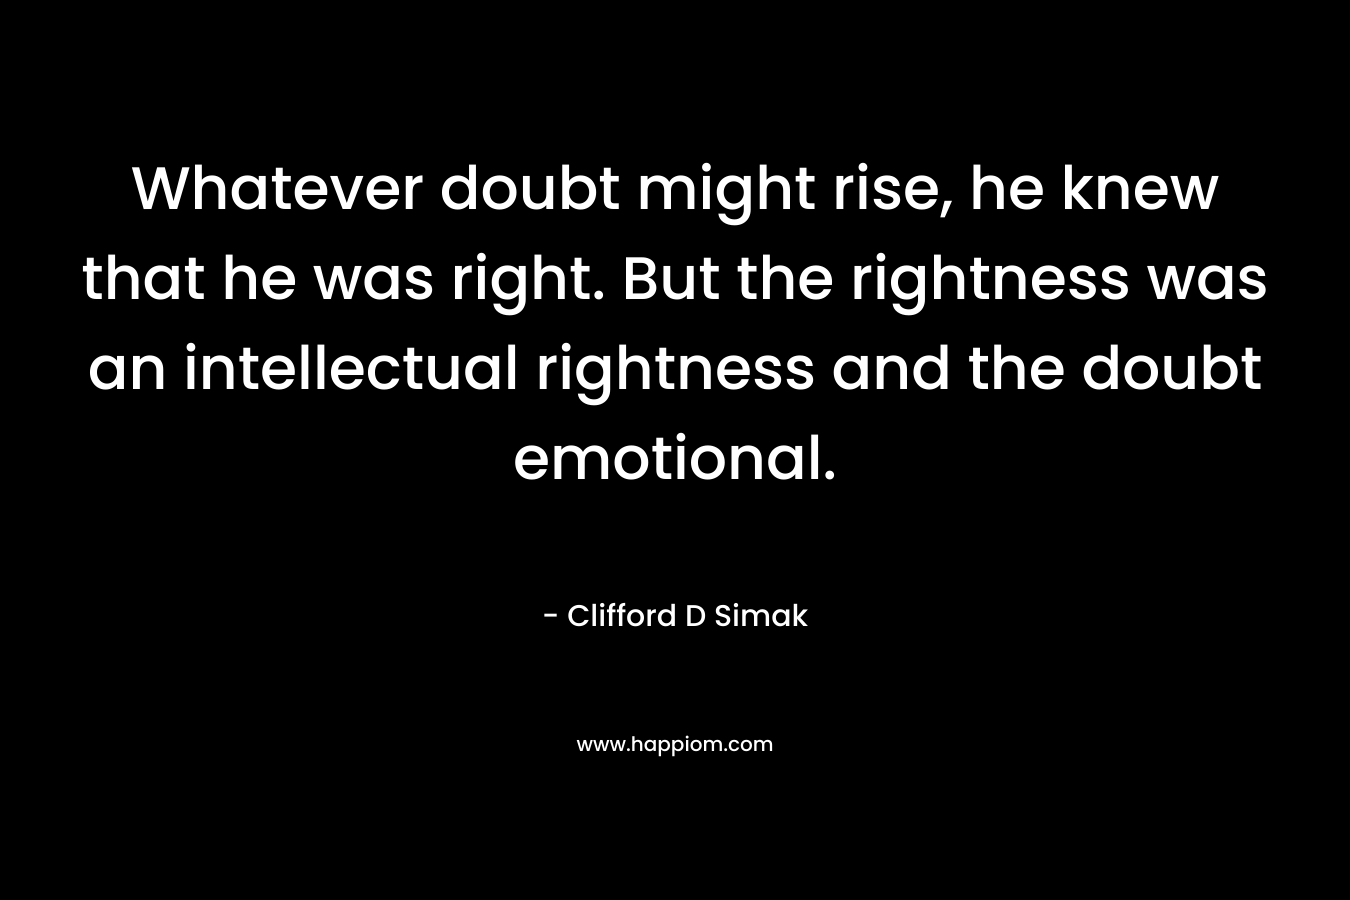 Whatever doubt might rise, he knew that he was right. But the rightness was an intellectual rightness and the doubt emotional. – Clifford D Simak